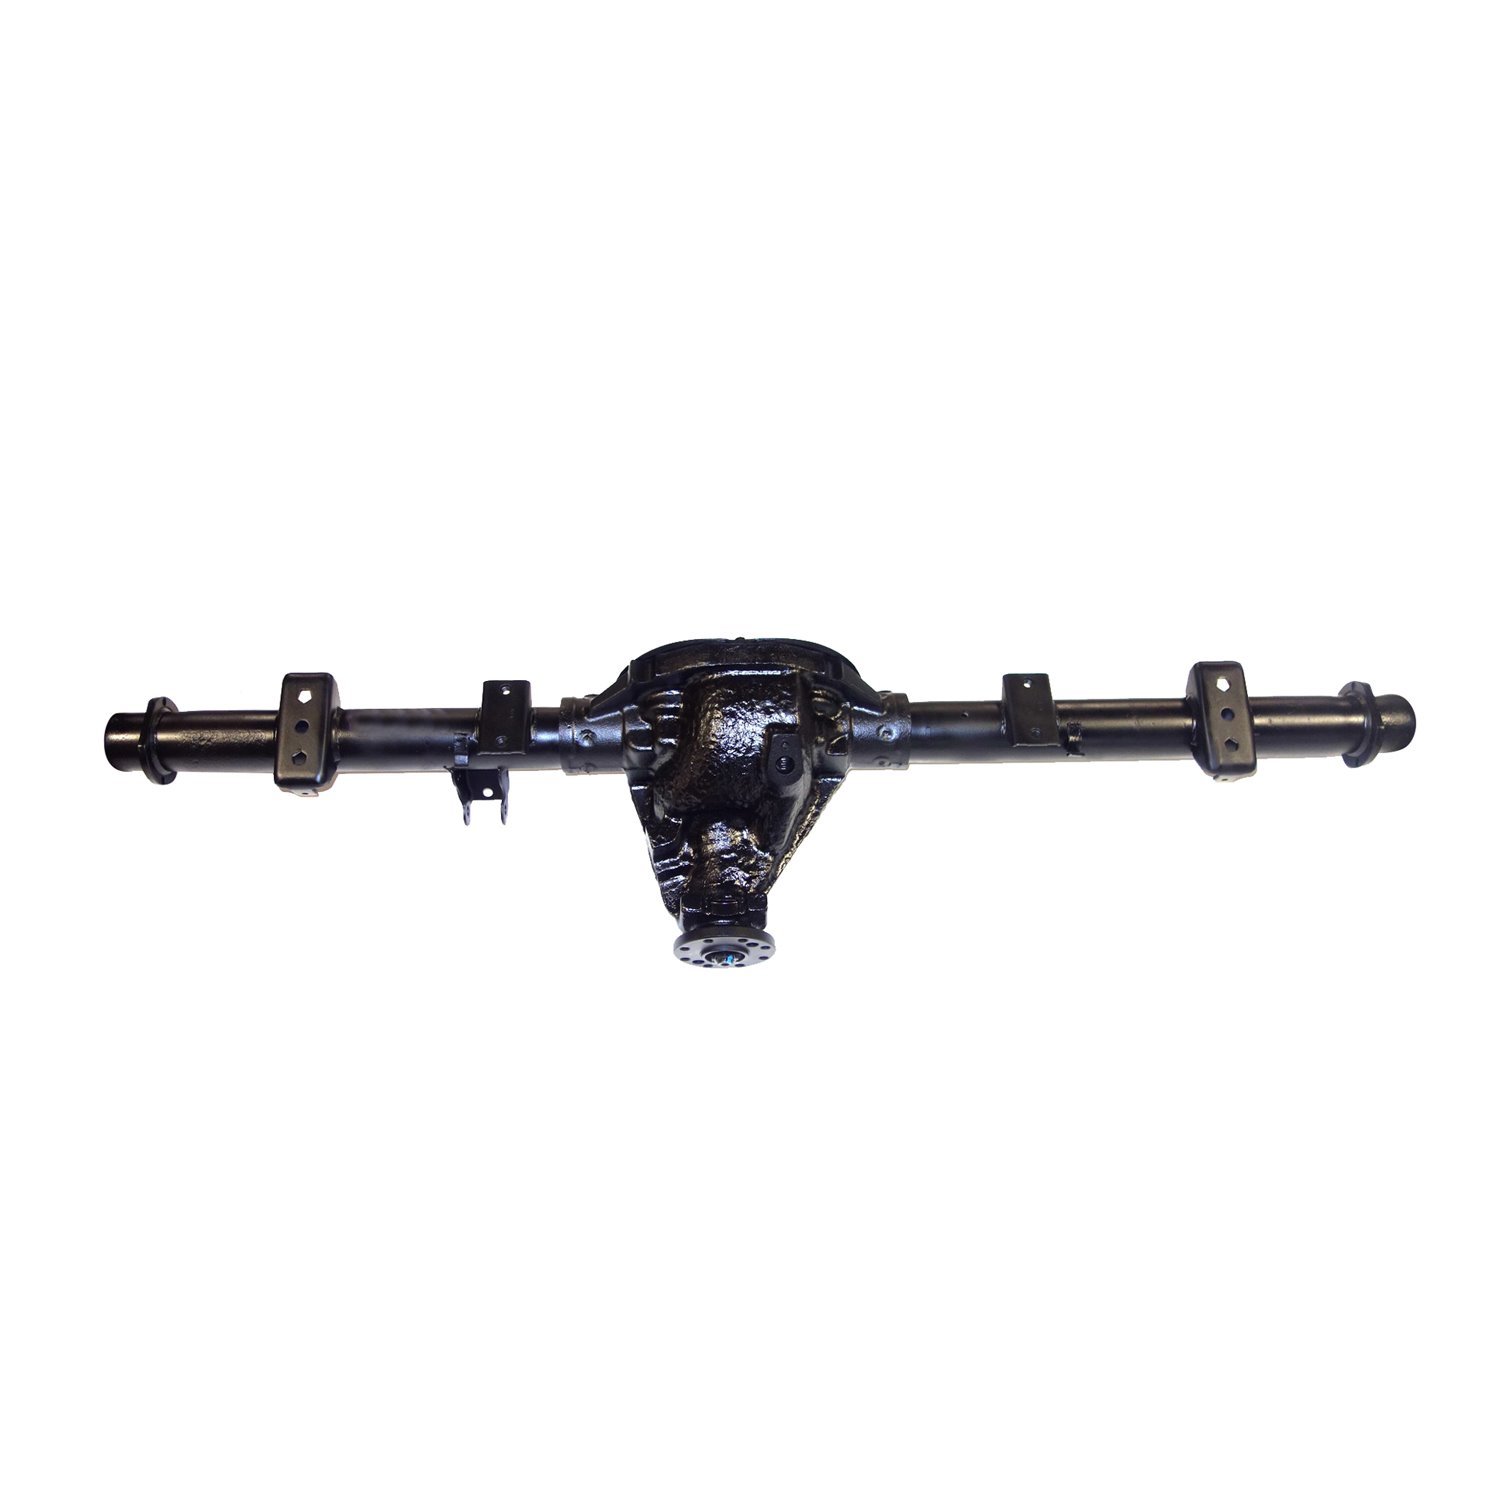 Remanufactured Complete Axle Assembly for Chrysler 8.25" 04-06 Dodge Durango 3.55 Ratio